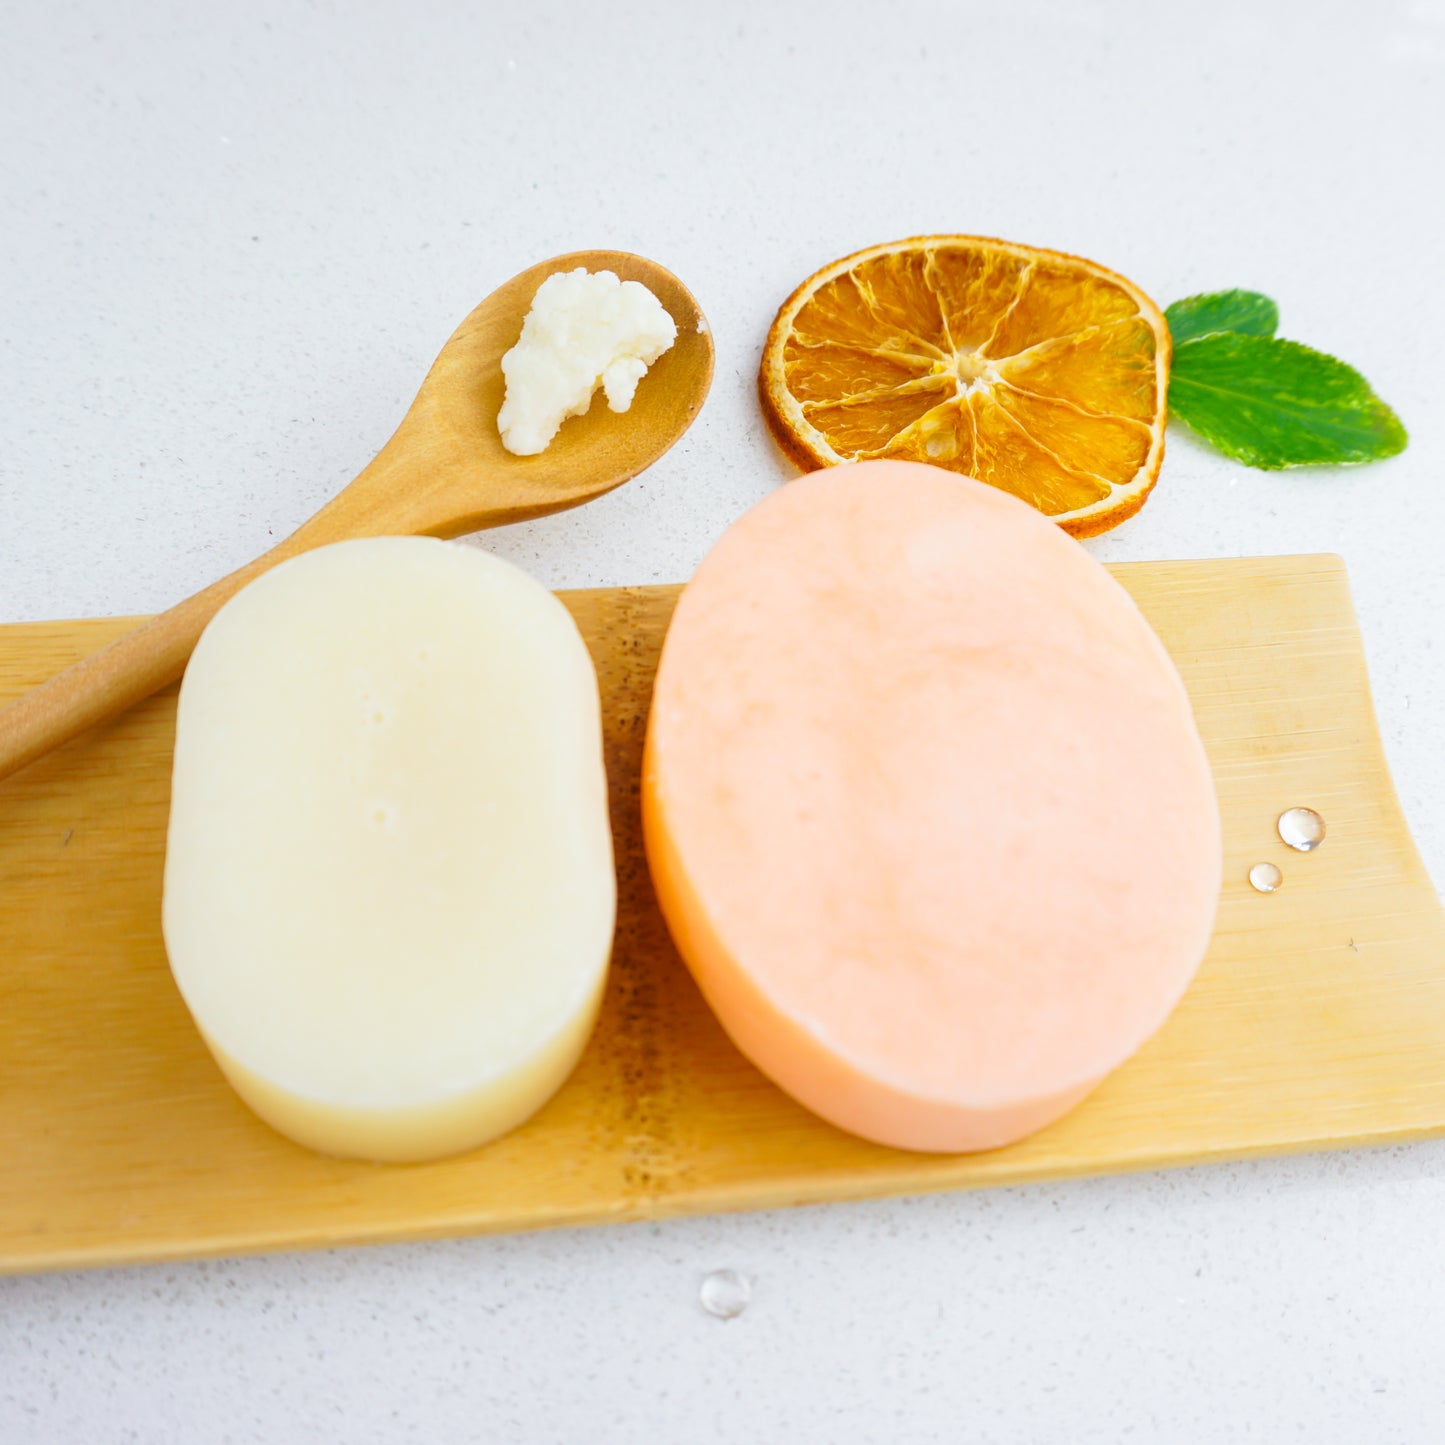 A large sweet orange shampoo bar and a conditioner bar on a wooden bamboo dish. A wooden spoon with shea butter in the background